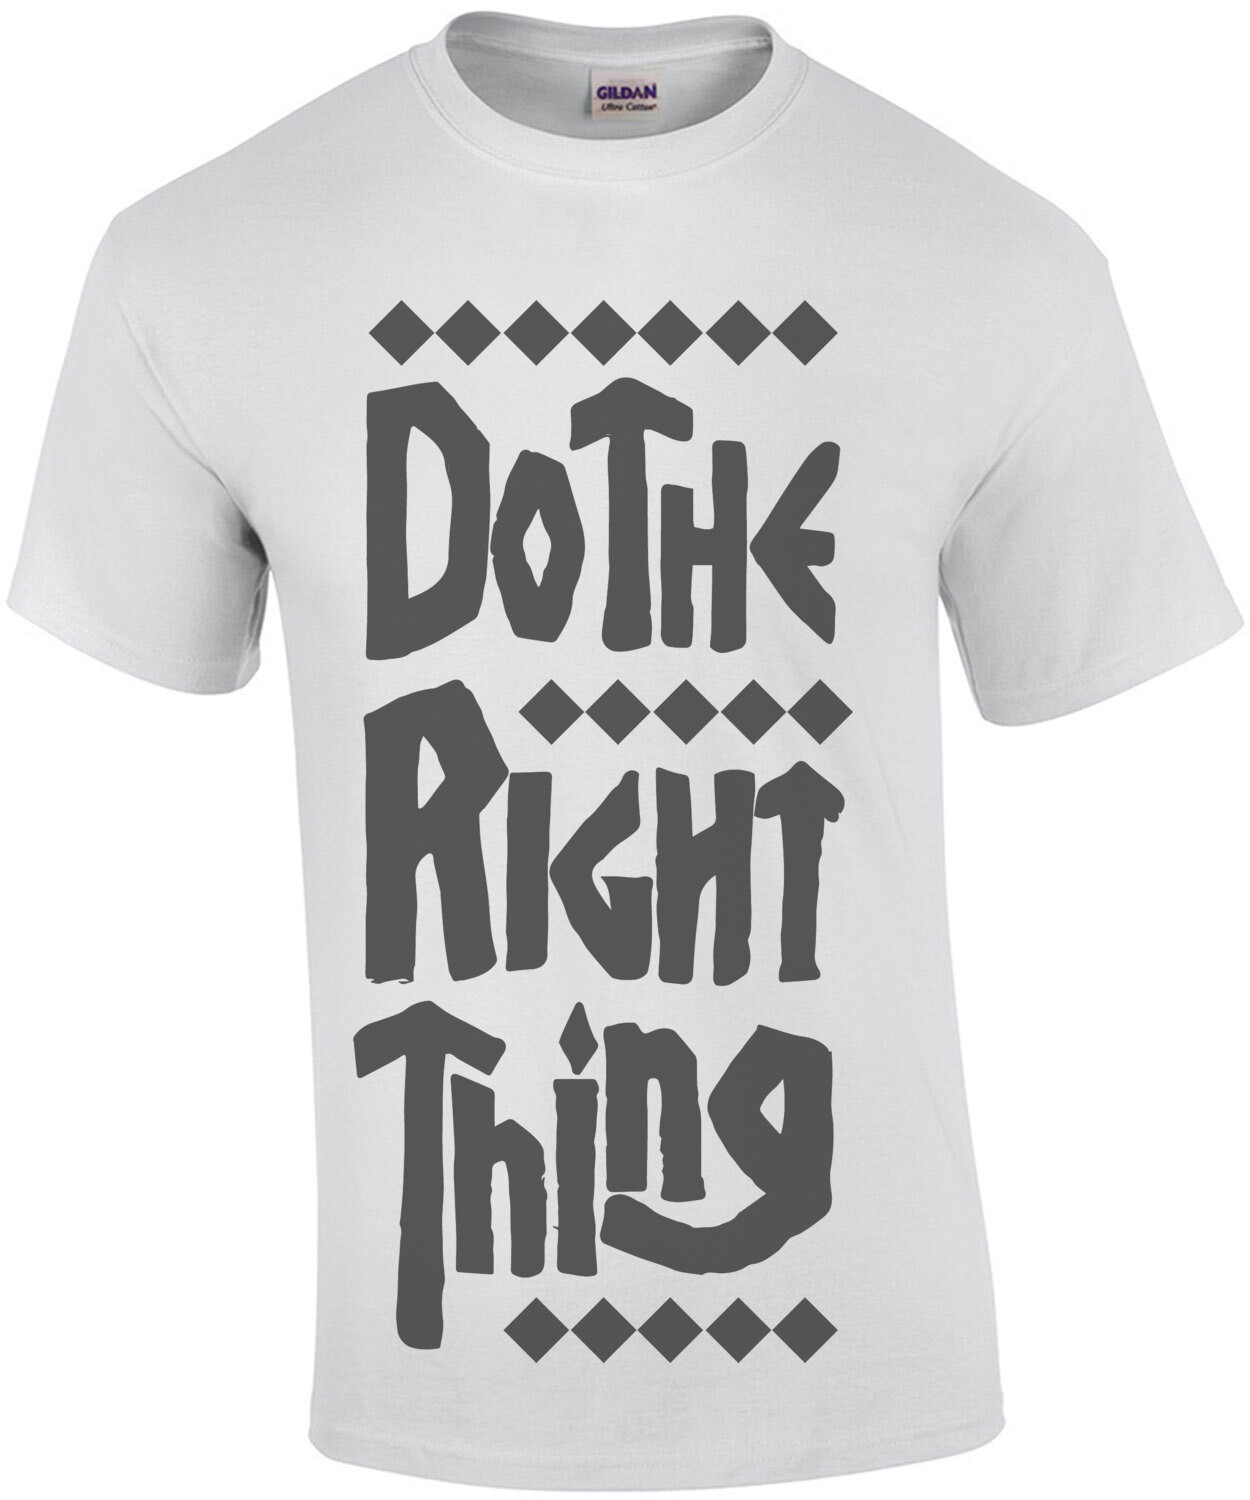 Do the right thing - 80's t-shirt